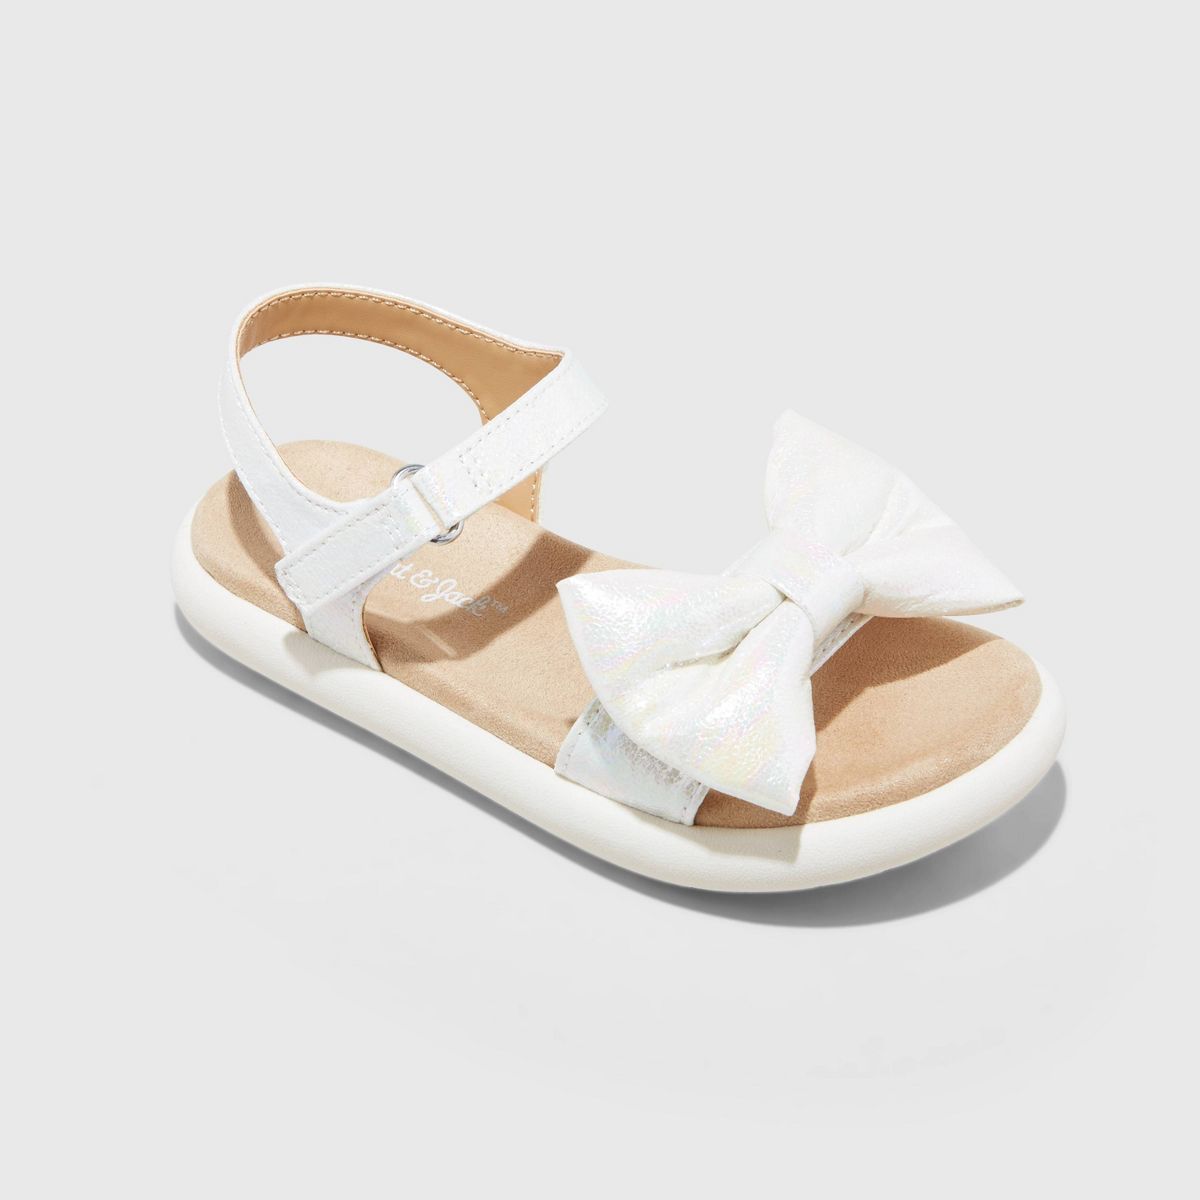 Toddler Babs Bow Sandals - Cat & Jack™ White 10T | Target